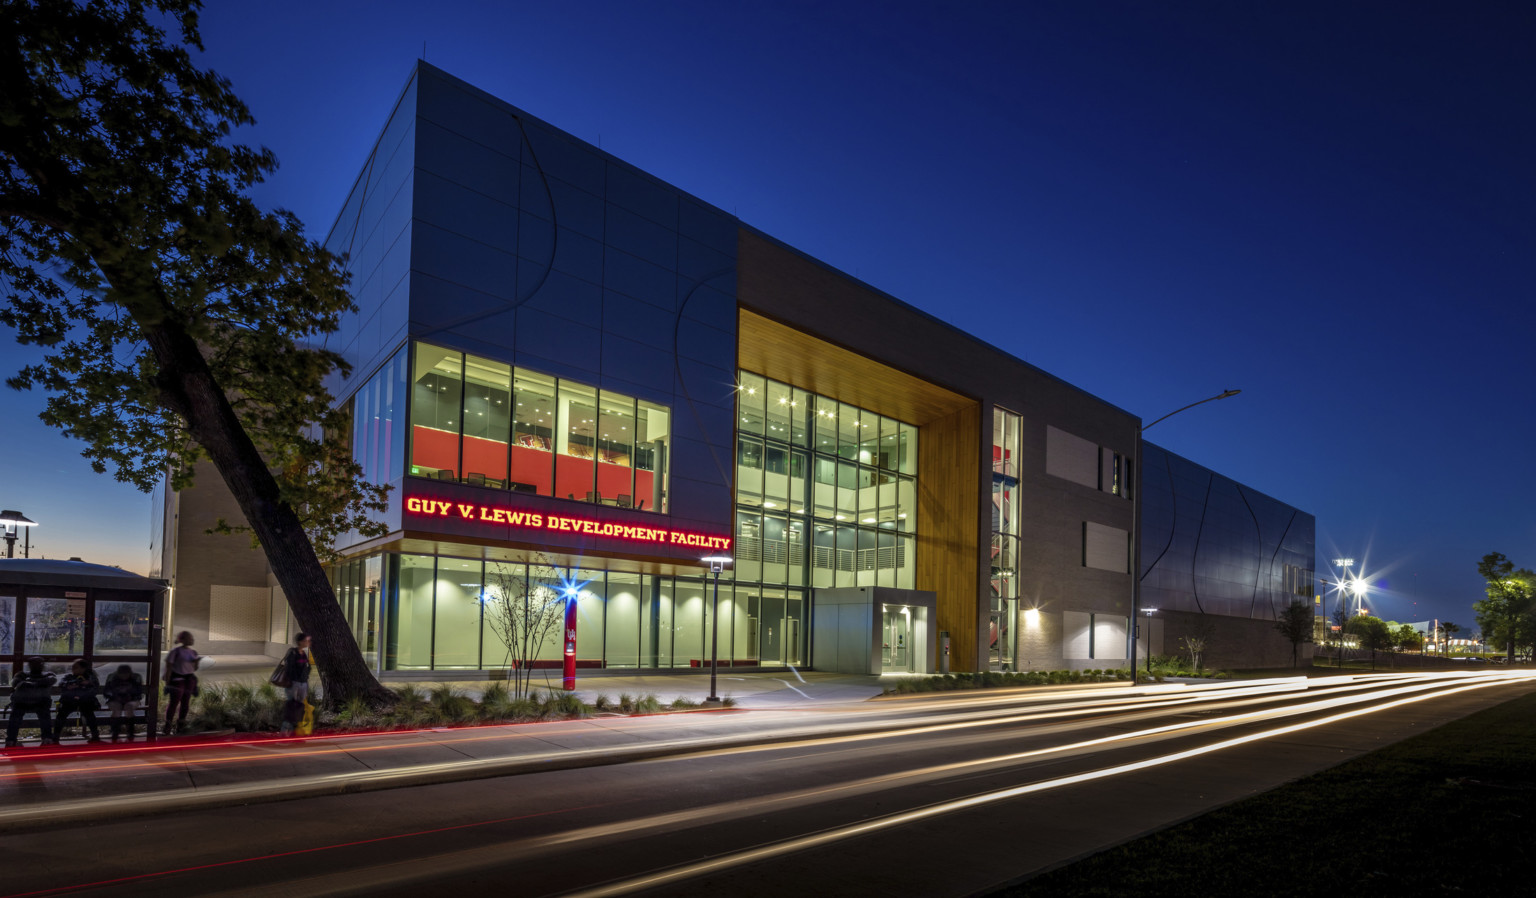 Guy V. Lewis Development Facility illuminated at night with red sign left of triple height glass entrance with wood accent